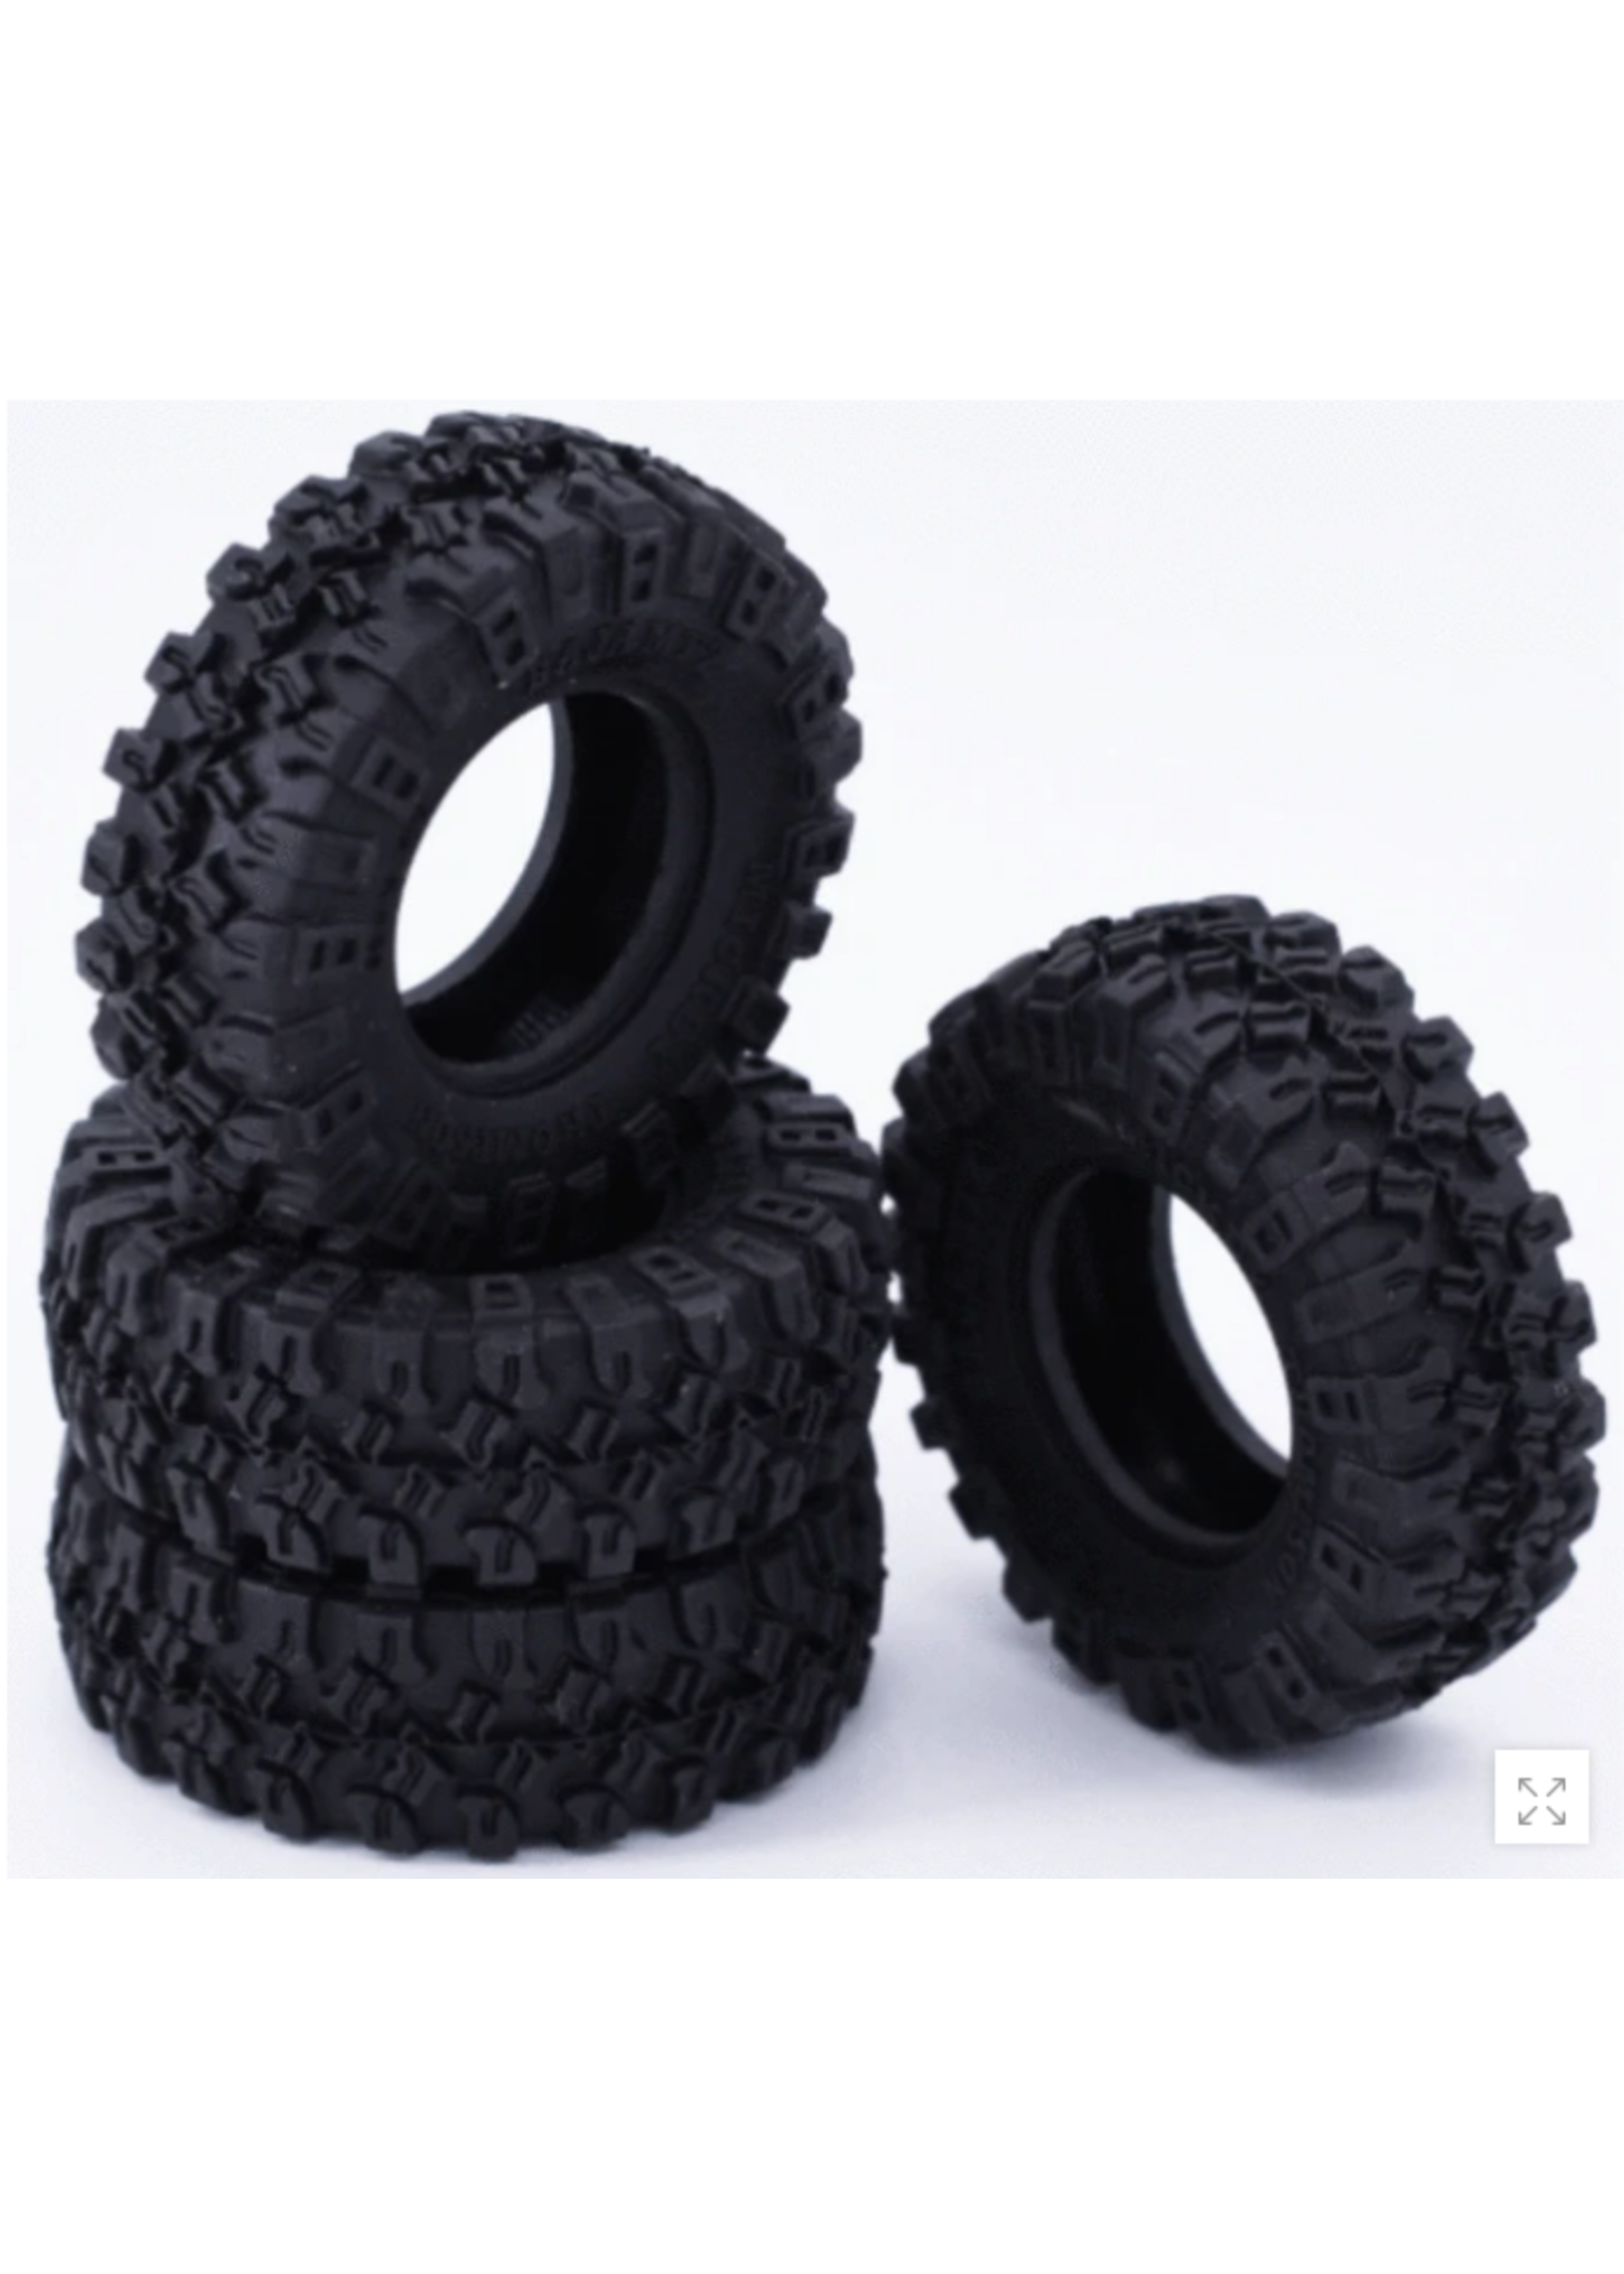 Hobby Details DTSCX24-49 Hobby Details A STYLE 1.0 Micro Tires with Foam 4pc Set